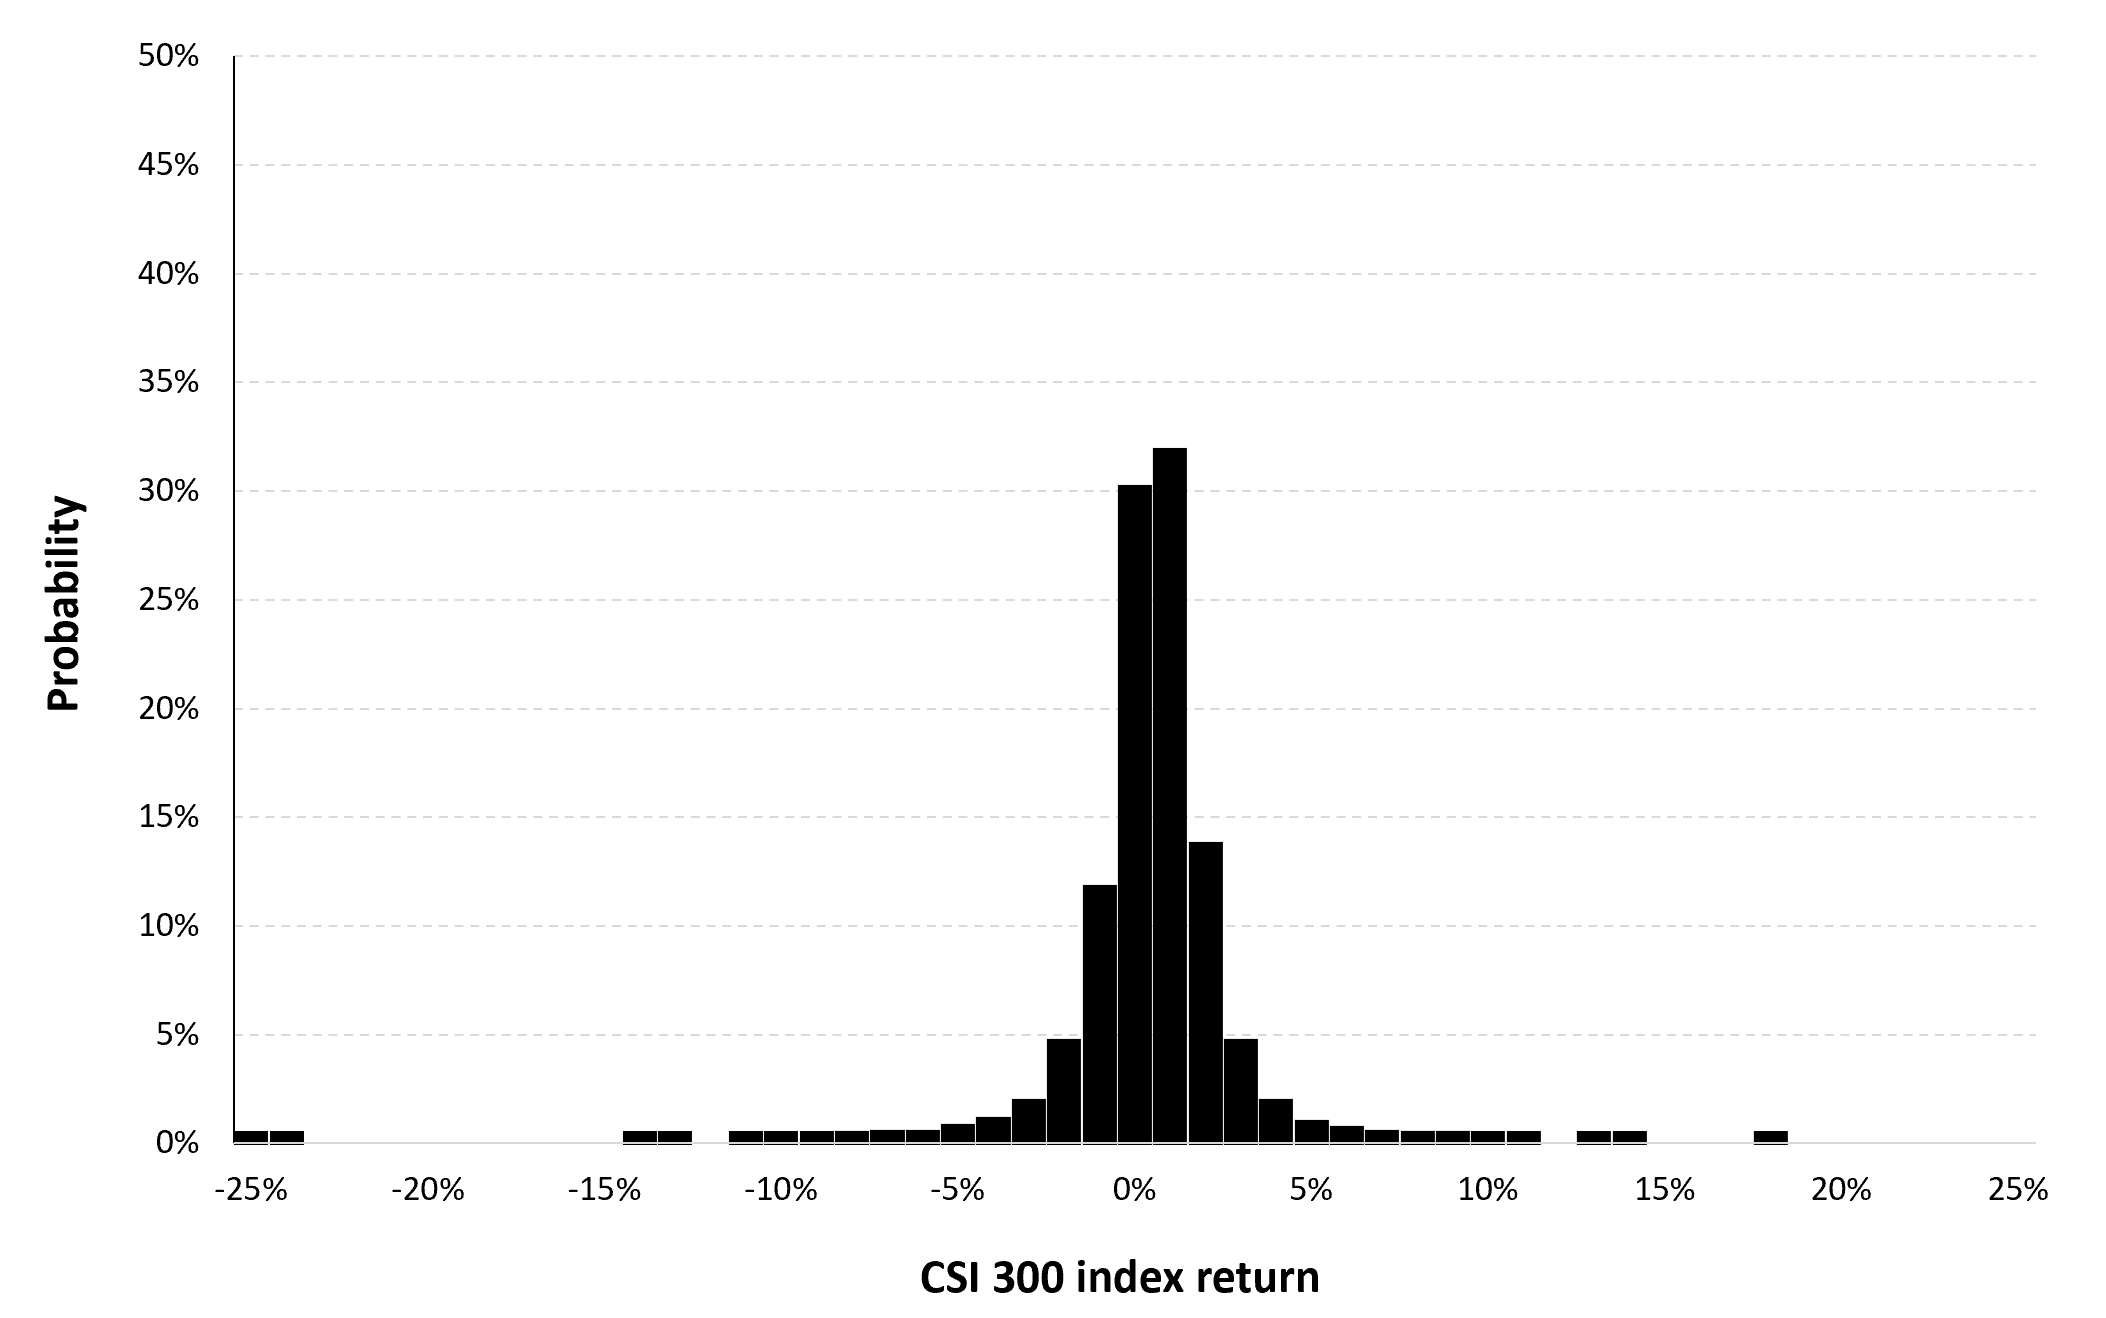 Historical distribution of the daily CSI 300 index returns